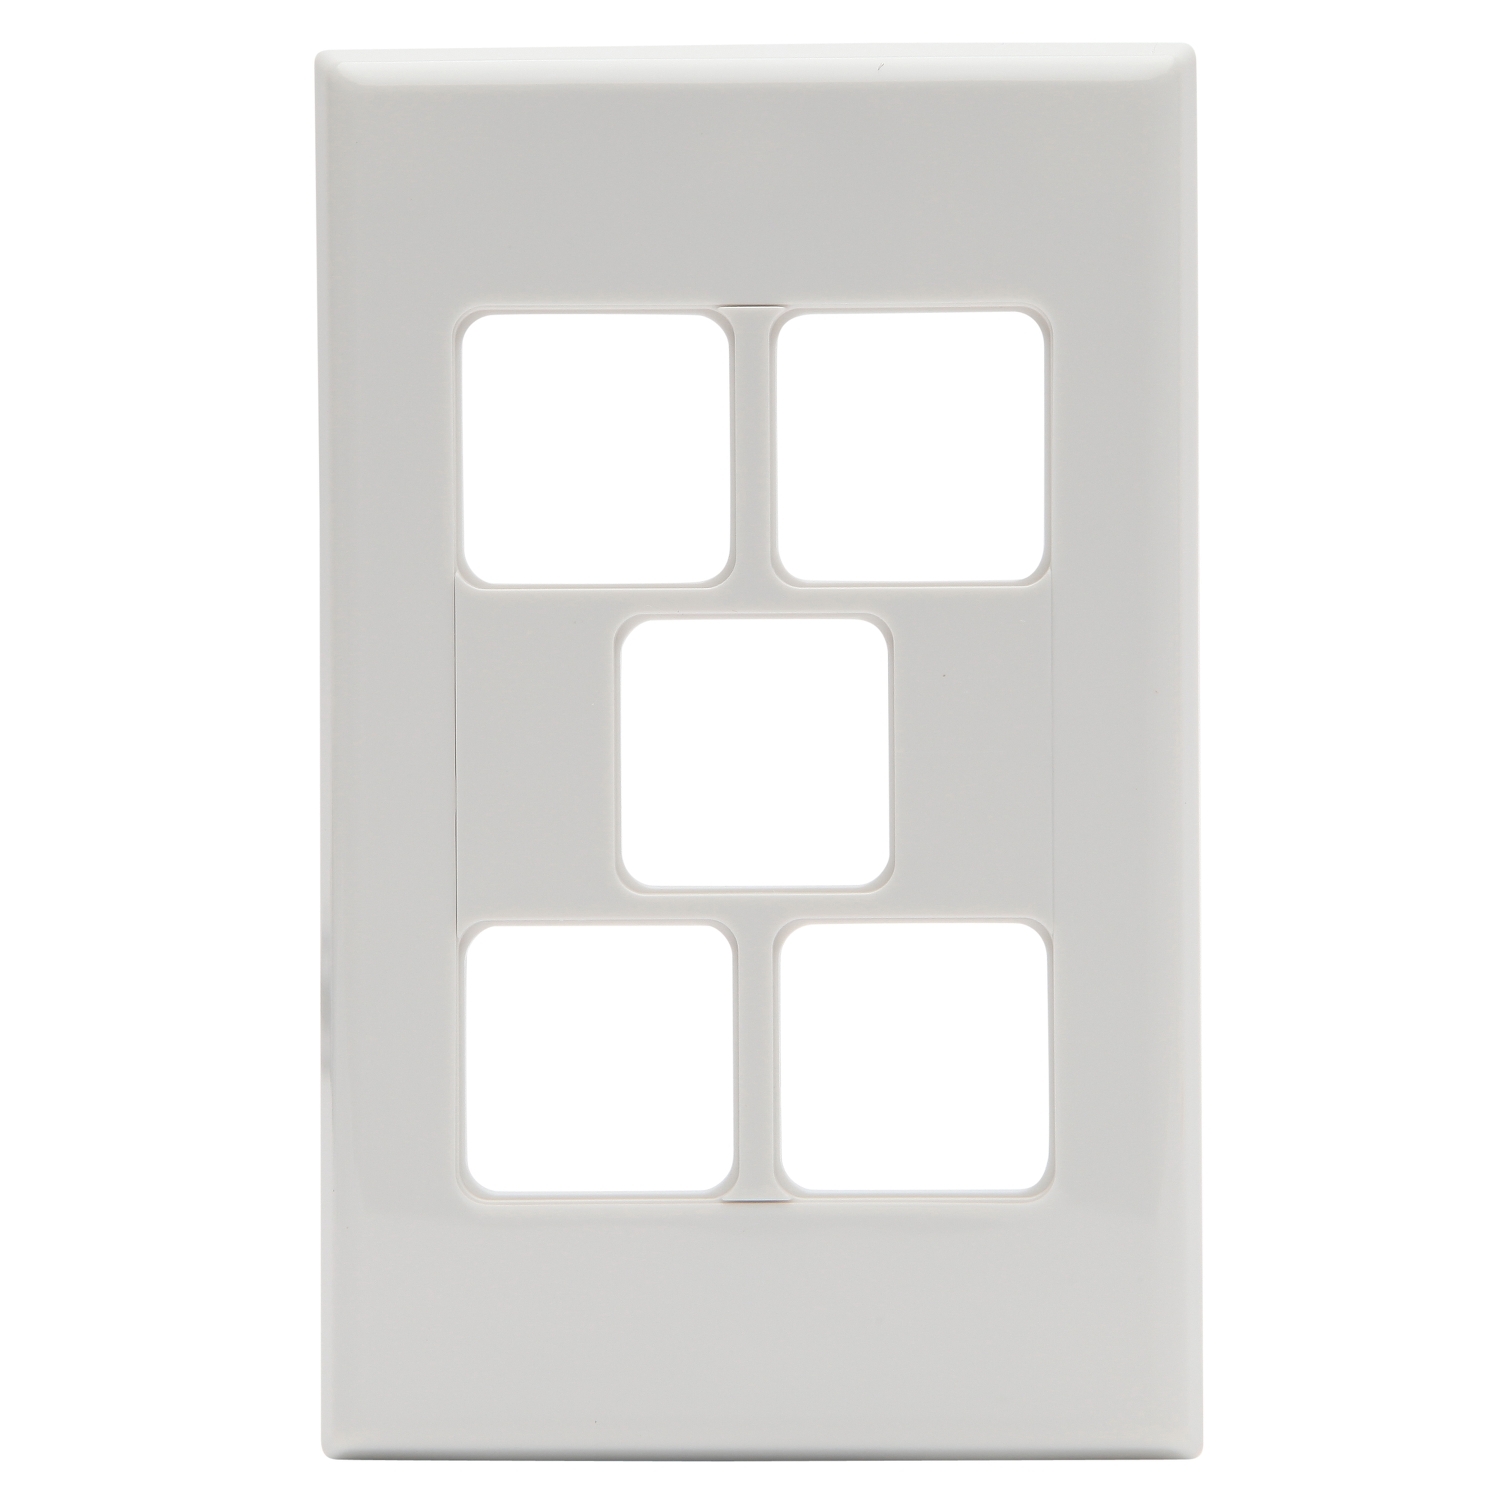 PDL 600 Series - Grid + Cover Plate Switch 5-Gang - White